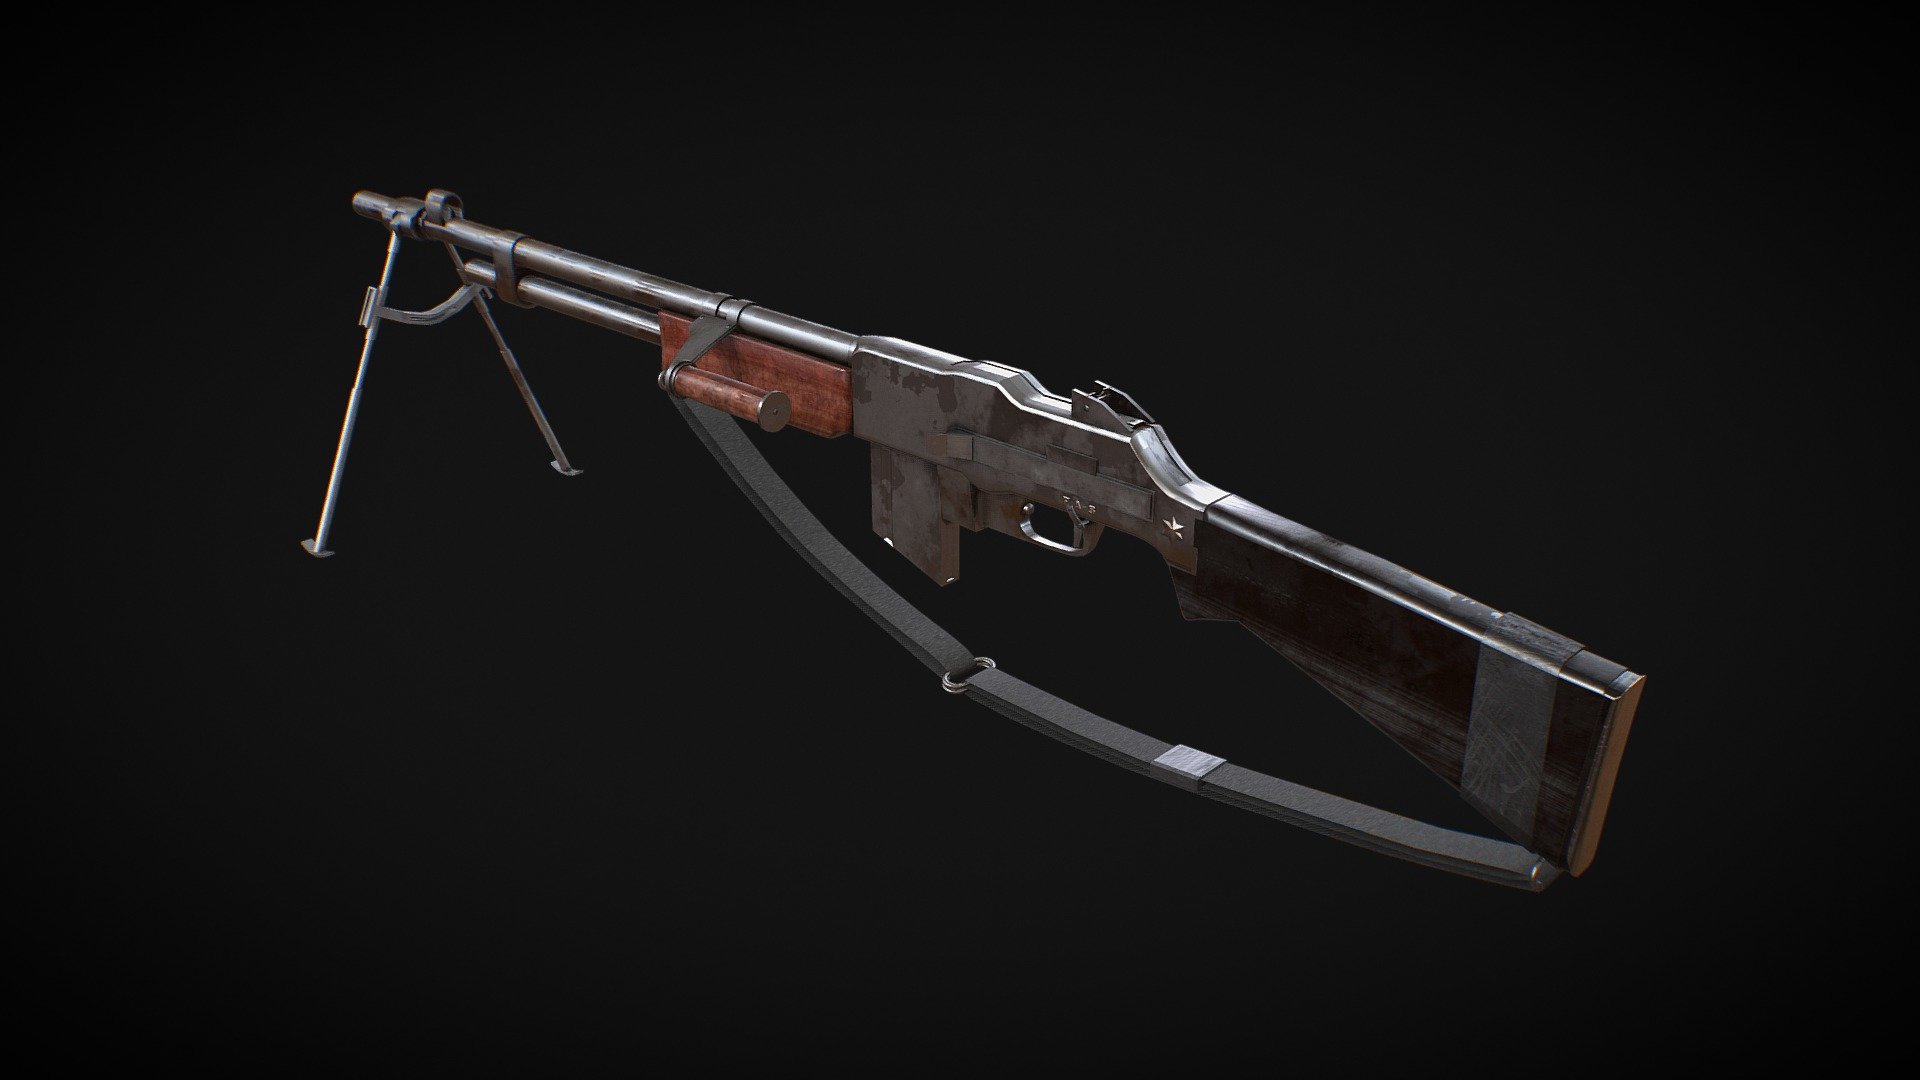 Browning automatic rifle